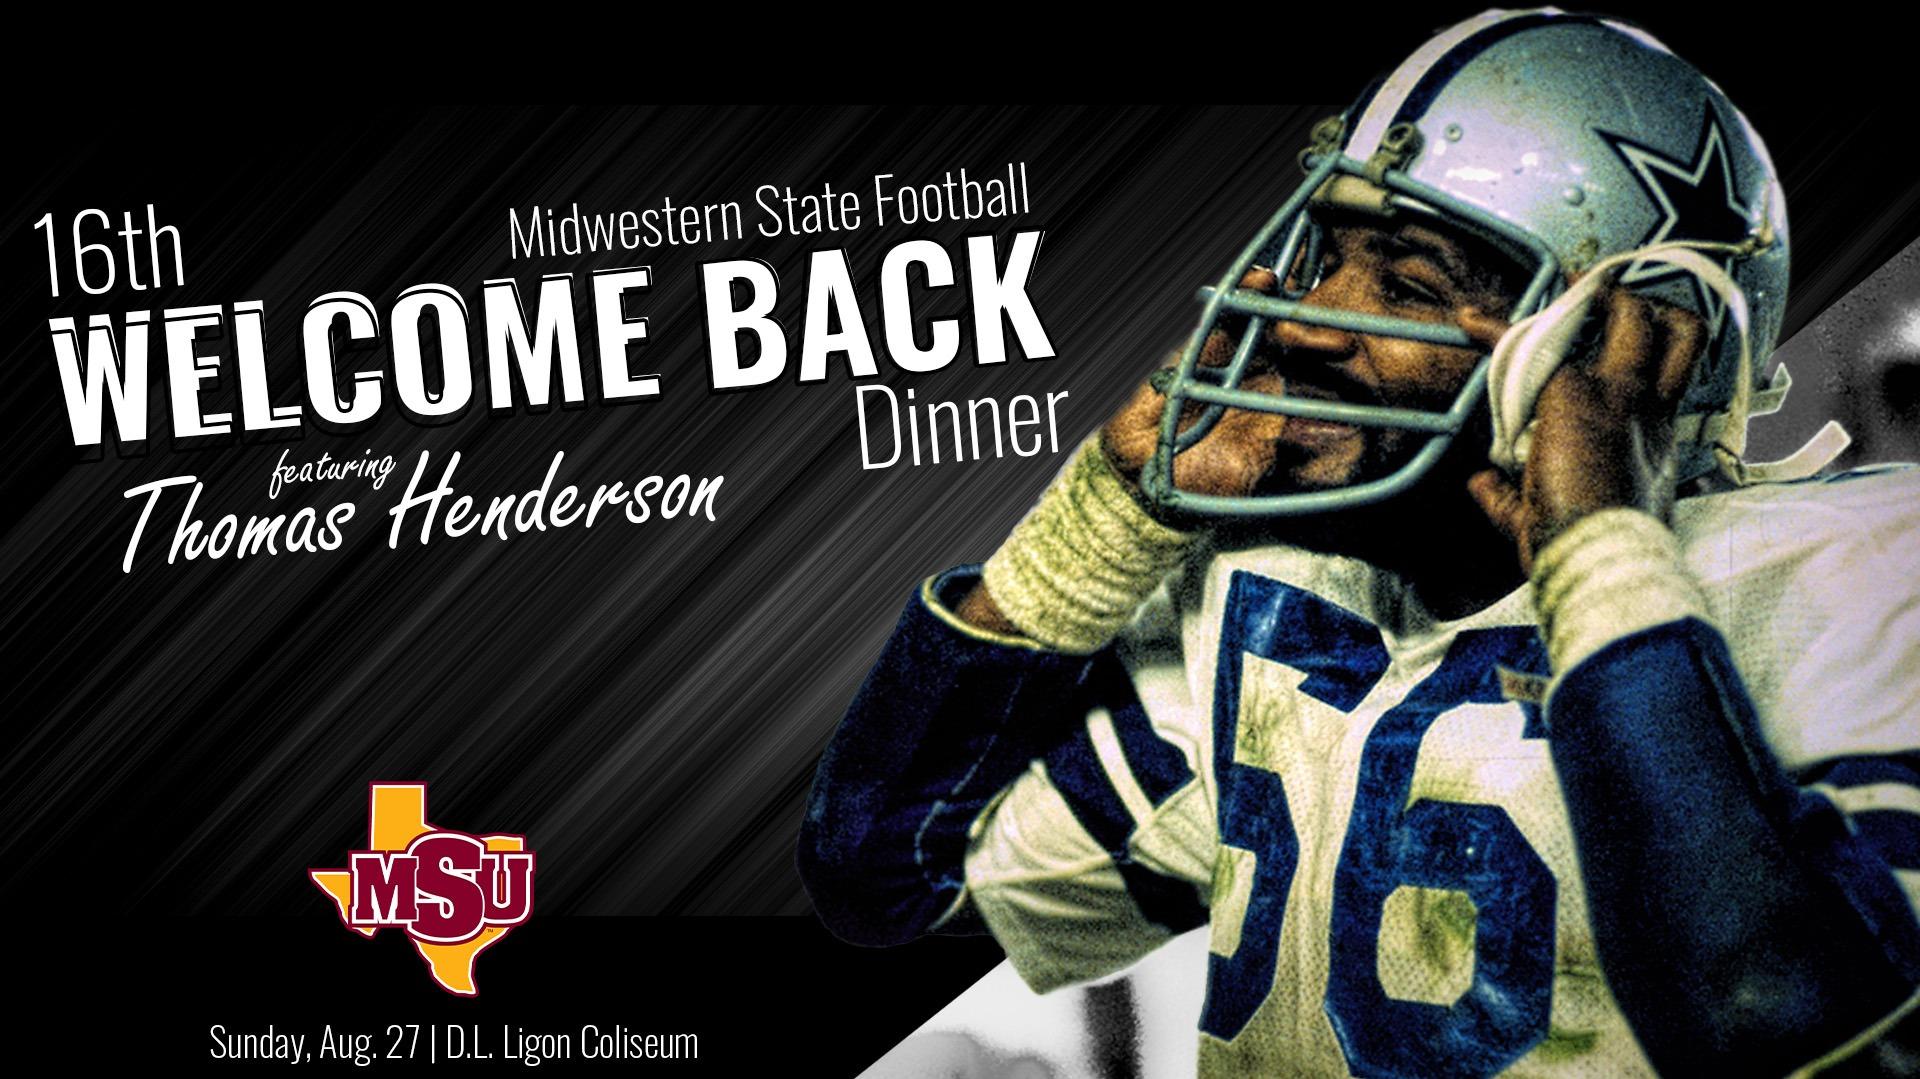 Midwestern State Wele Back Dinner To Feature Dallas Cowboy